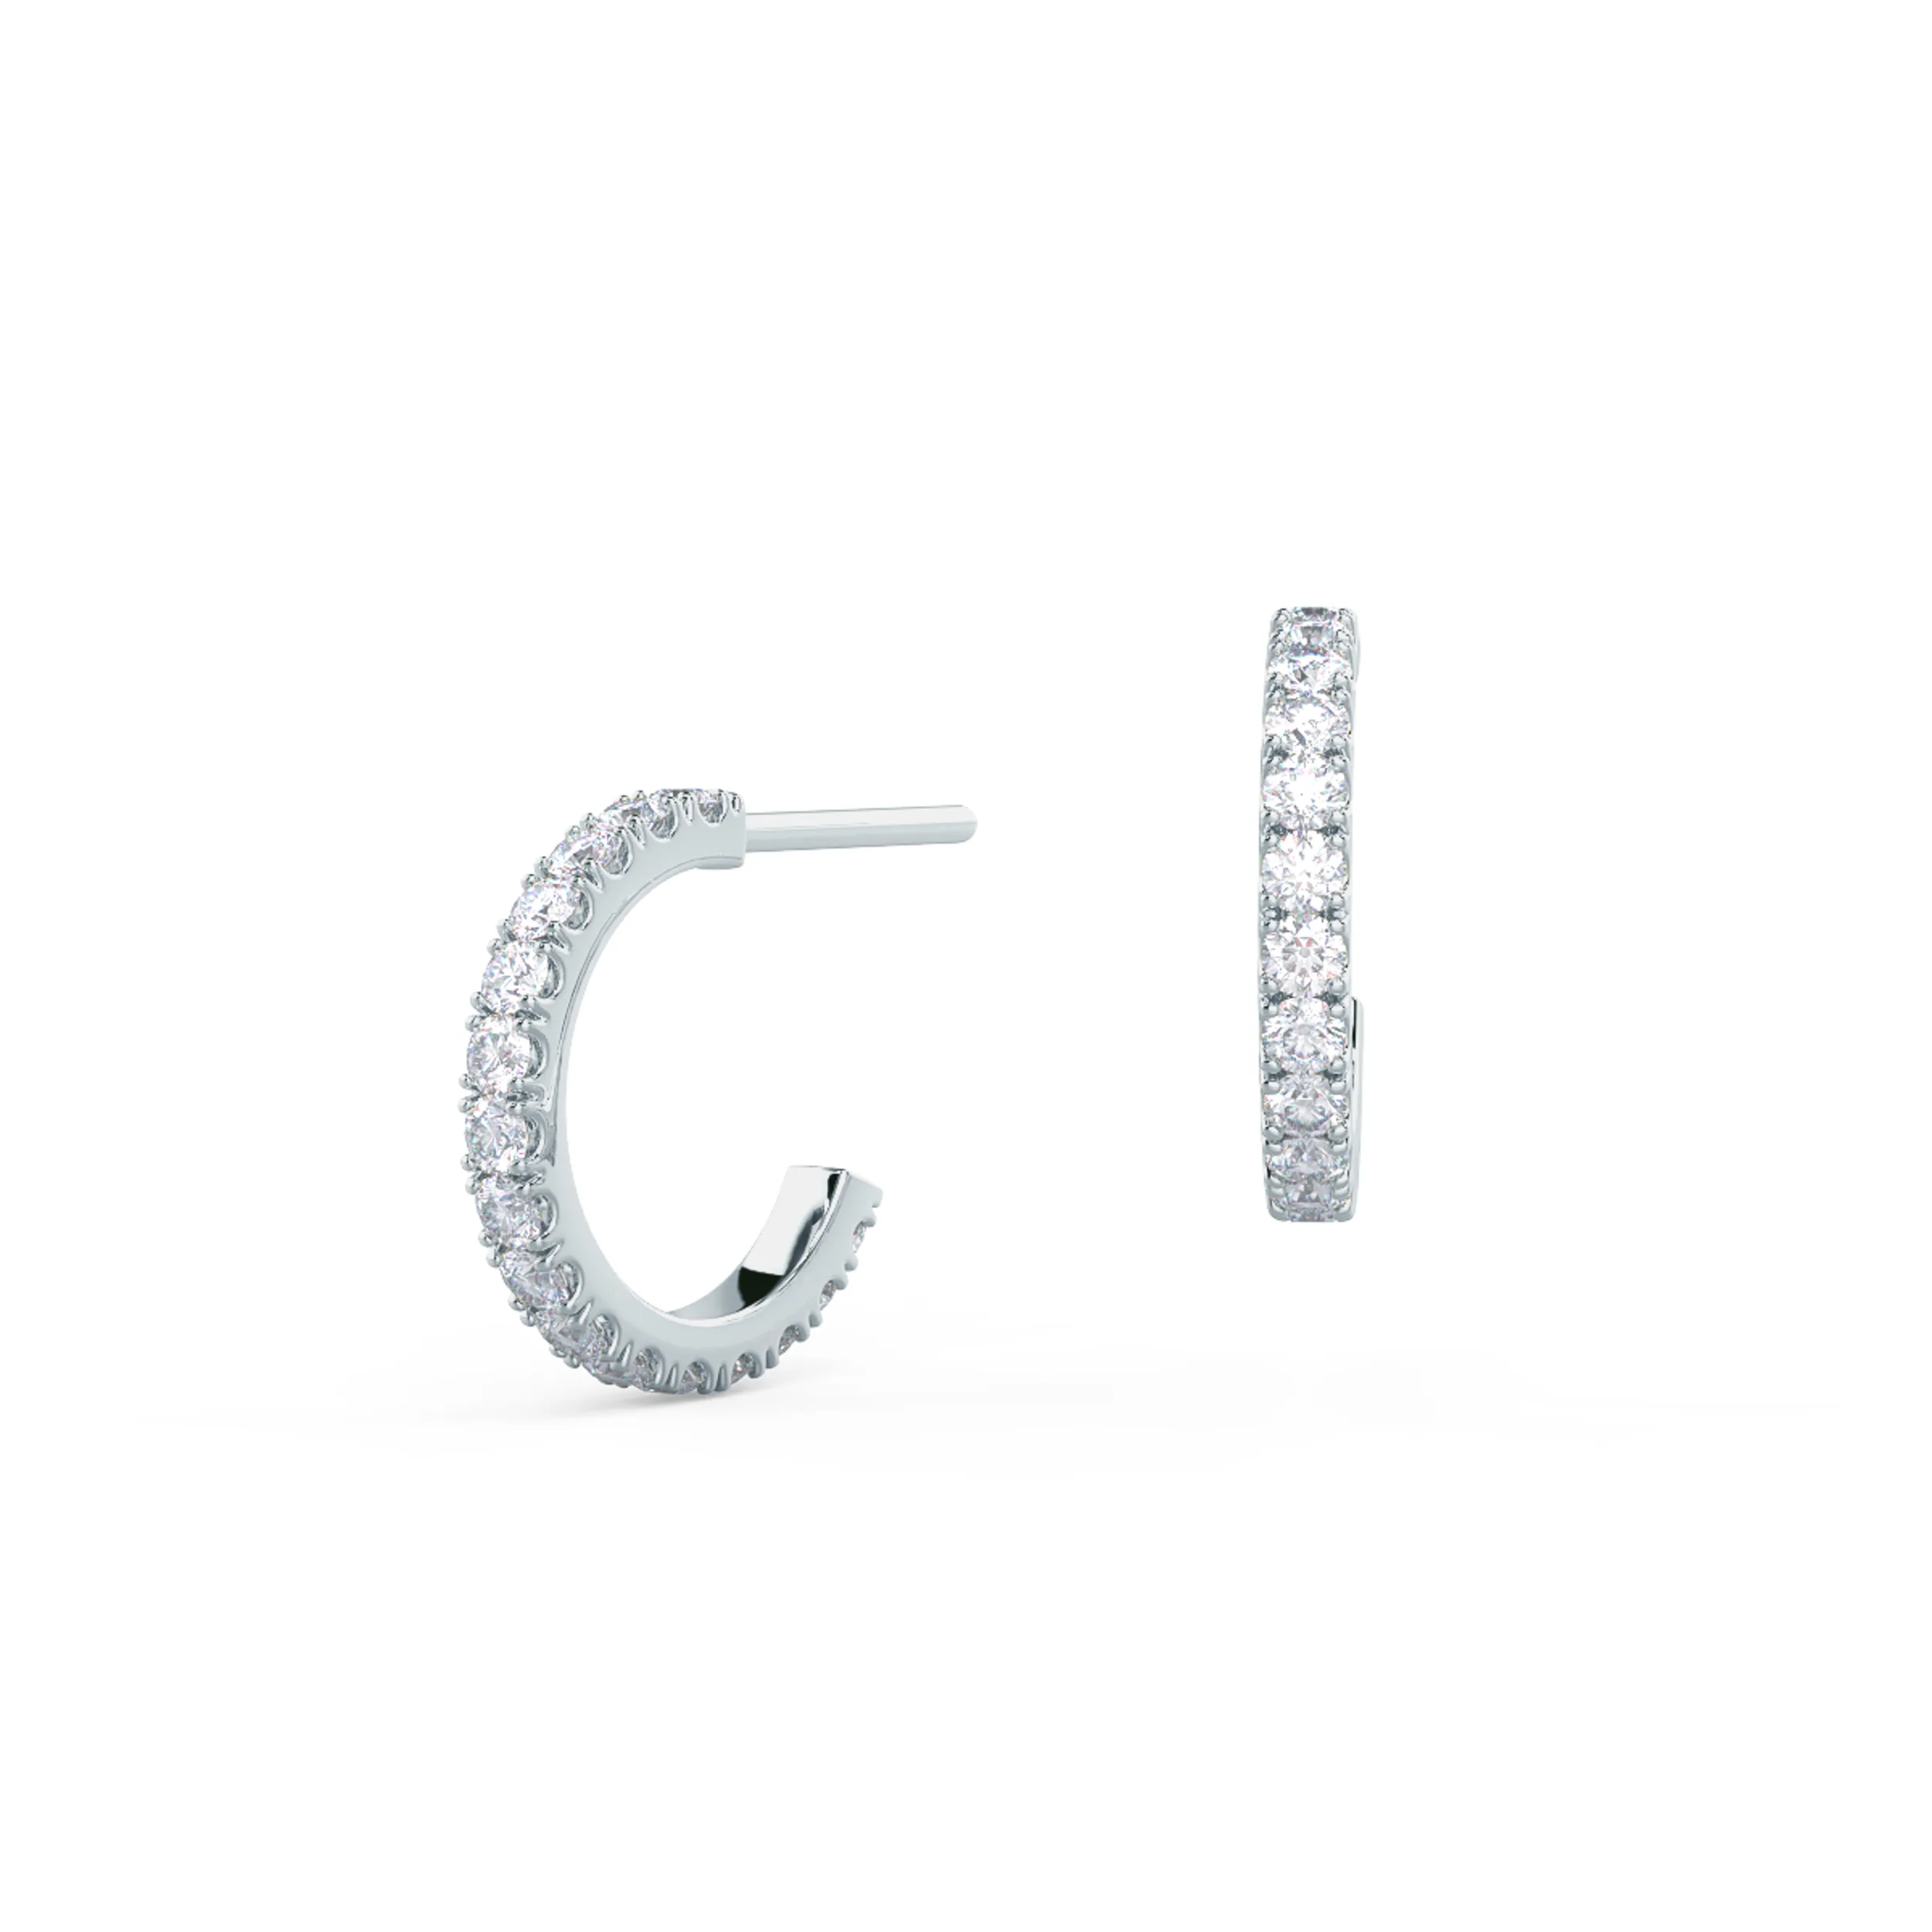 A pair of J-shaped huggie hoops featuring pave set lab created diamonds with a tension back in 14k White Gold.